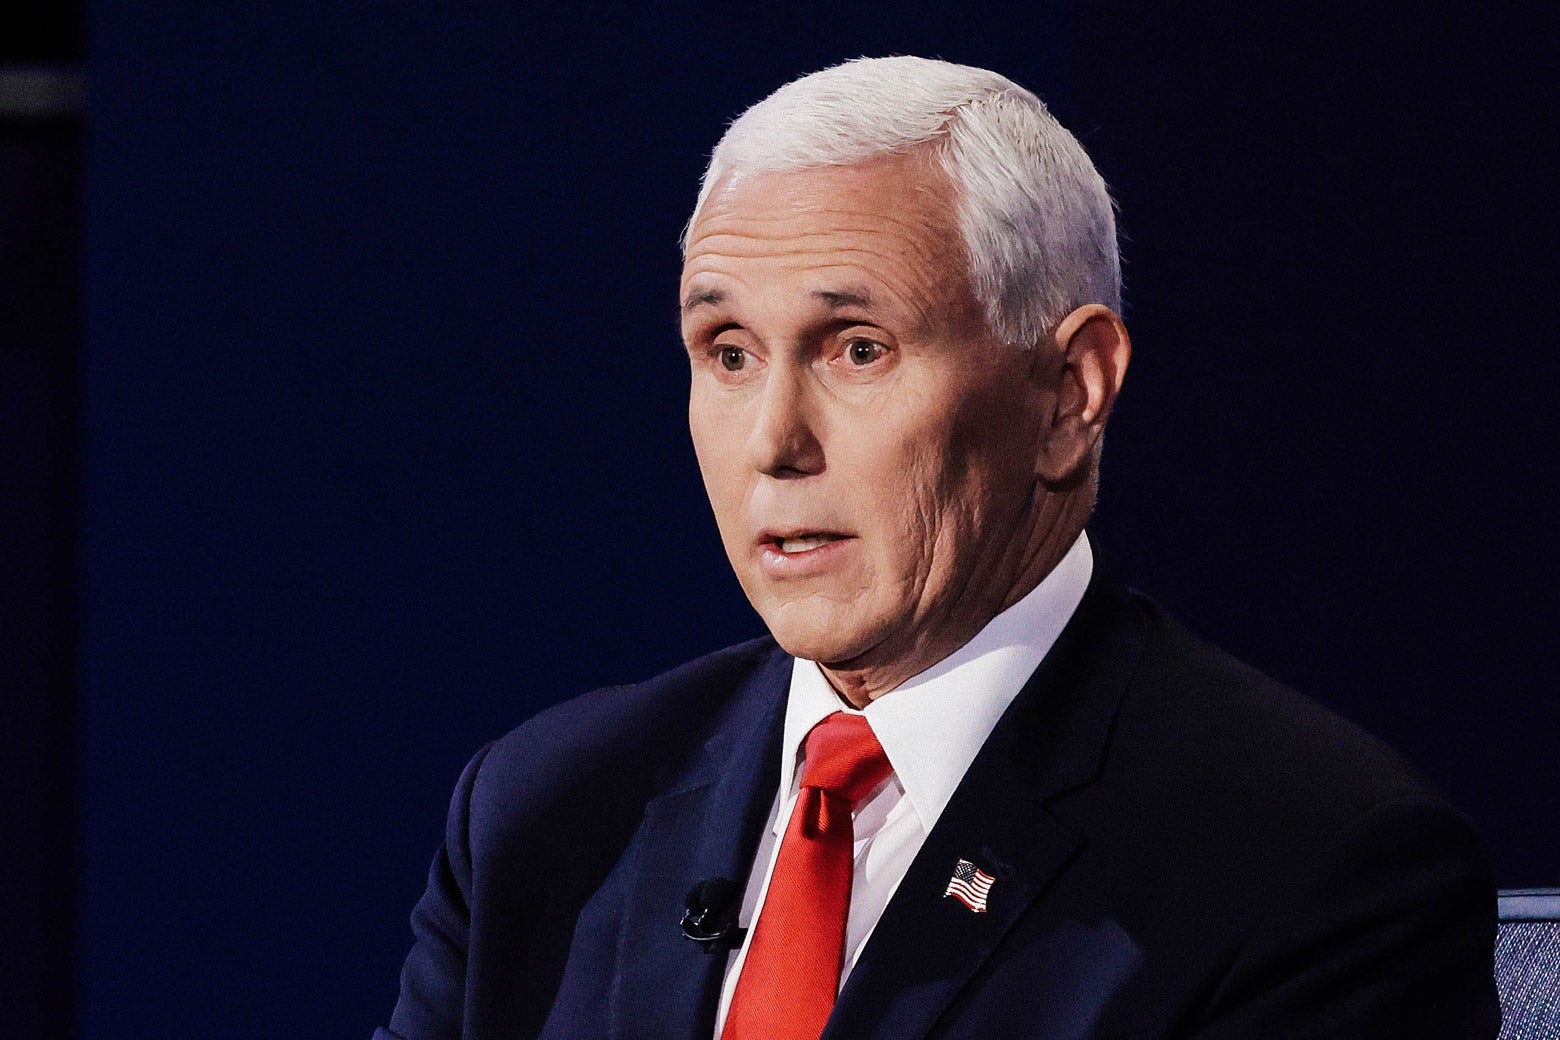 Close-up on Mike Pence's face, mouth open